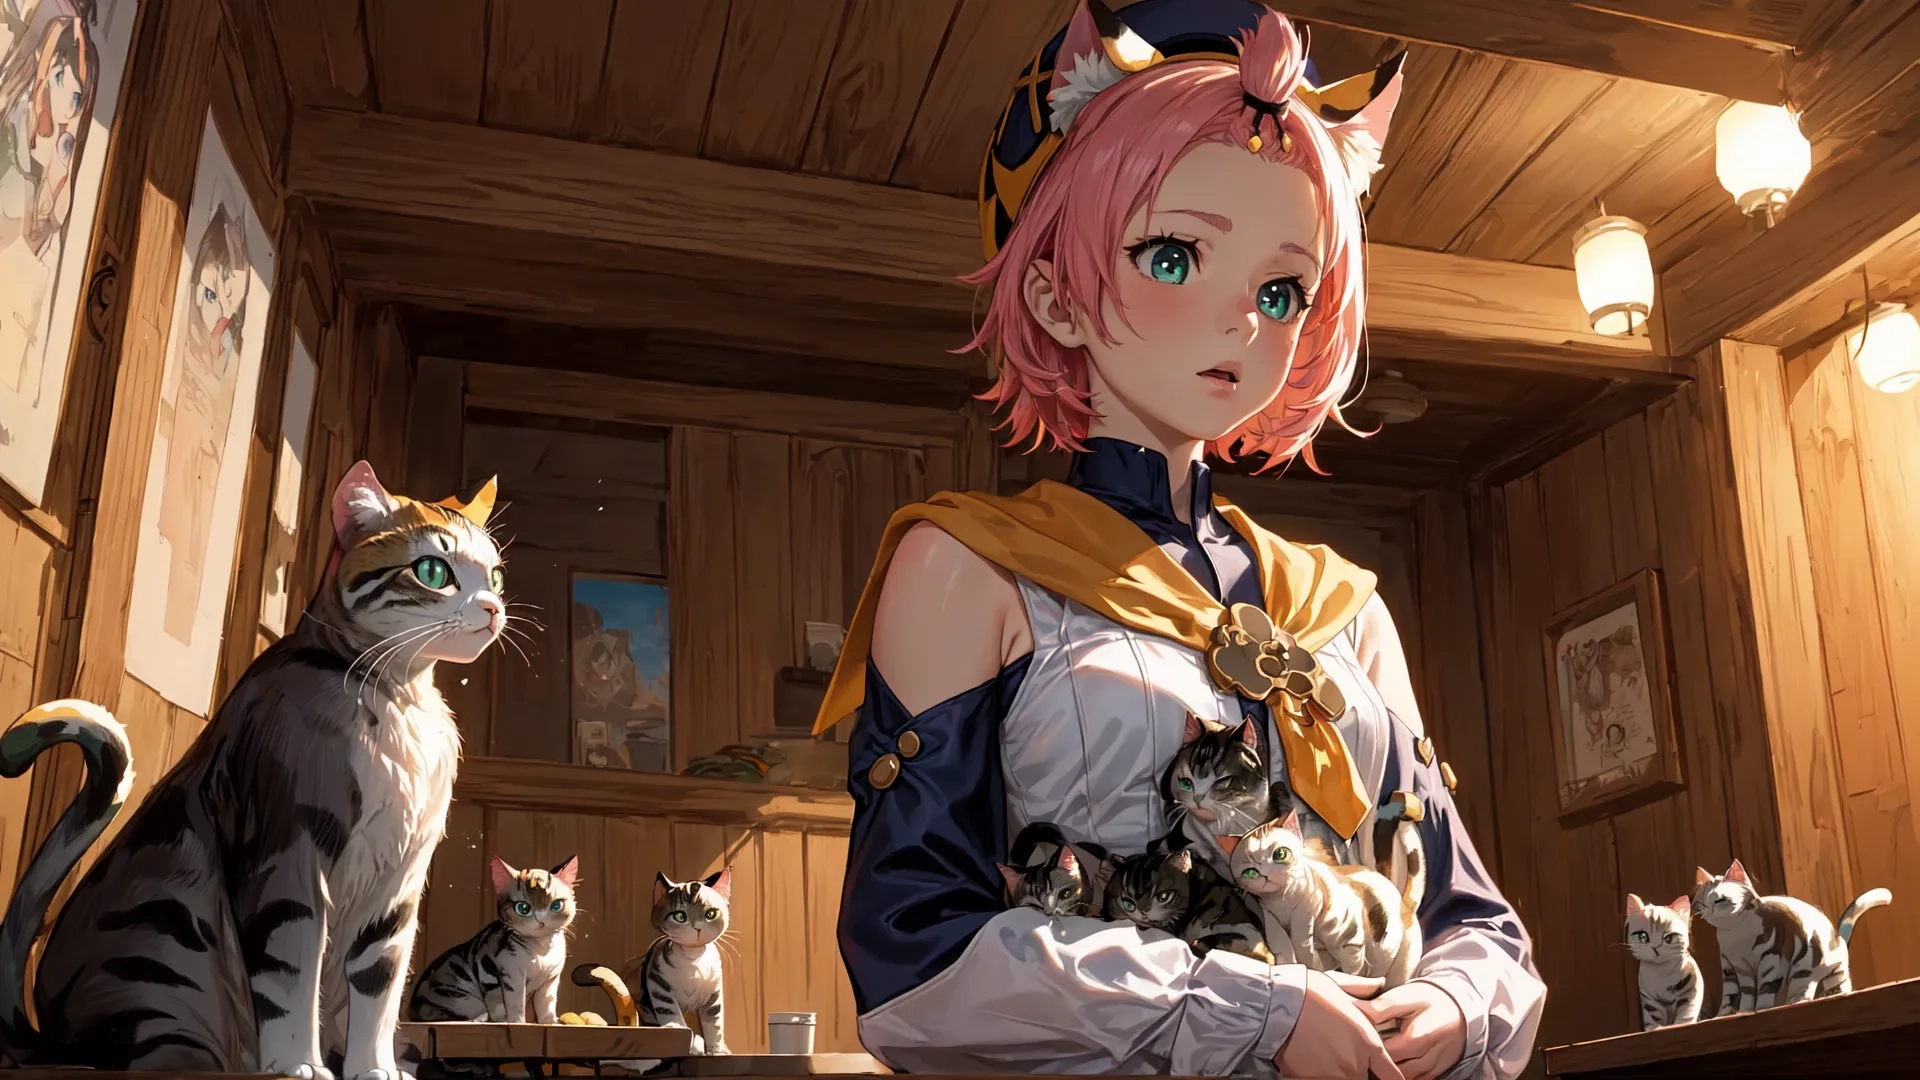 a anime girl with her hands on the lap of a cat while sitting next to them in a wooden room with several kitty figures on a shelf nearby area
